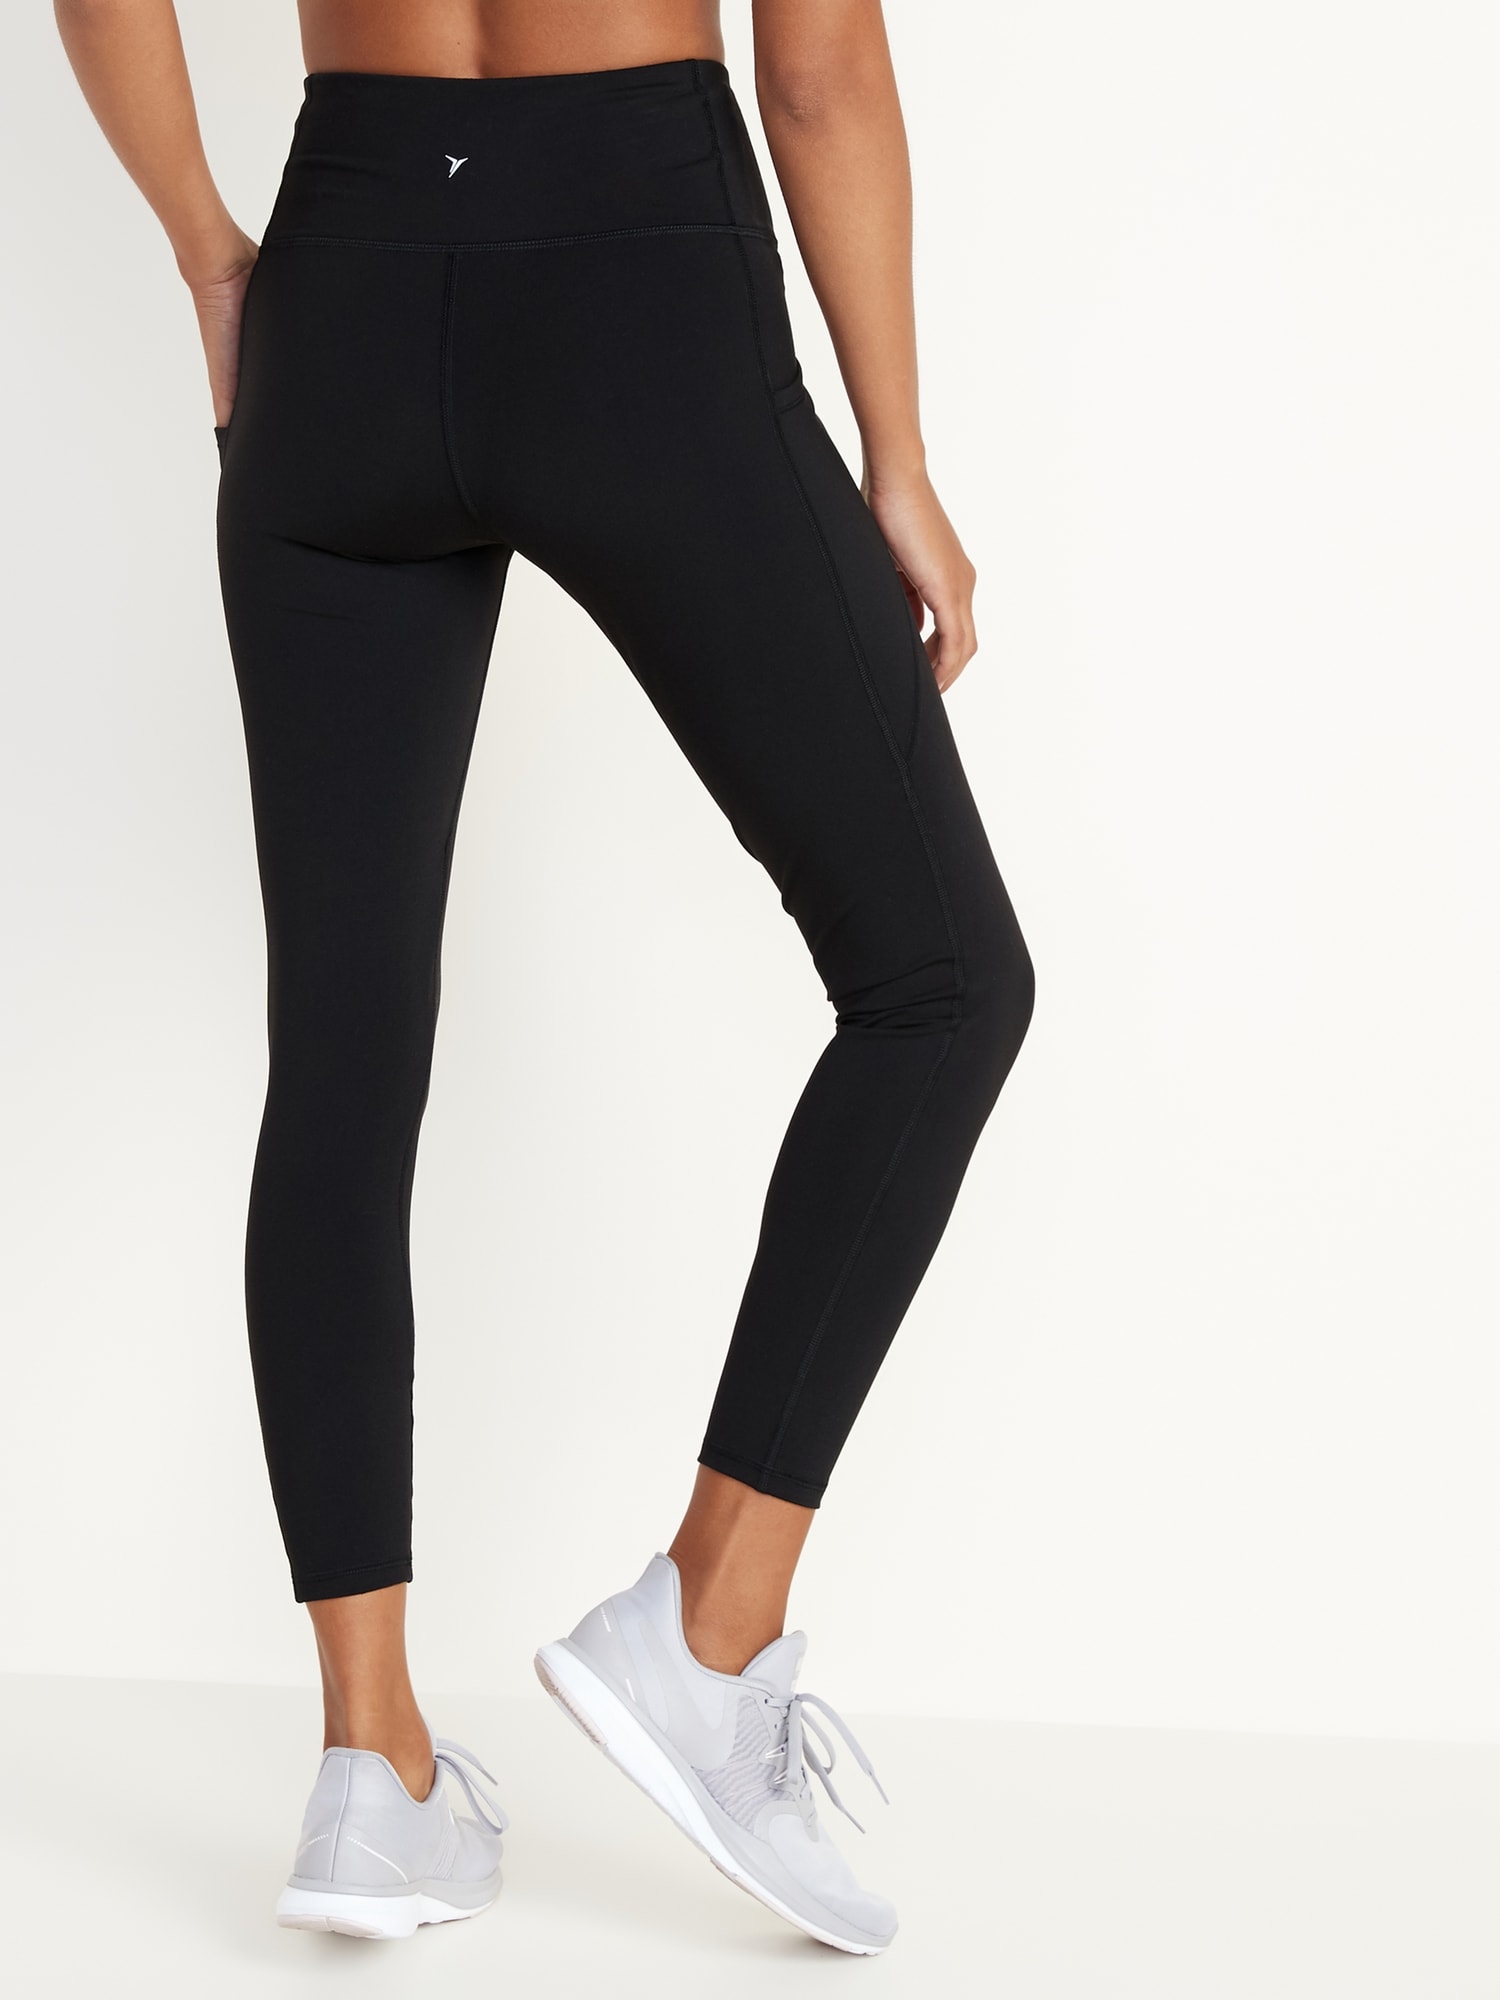 navy leggings with pockets